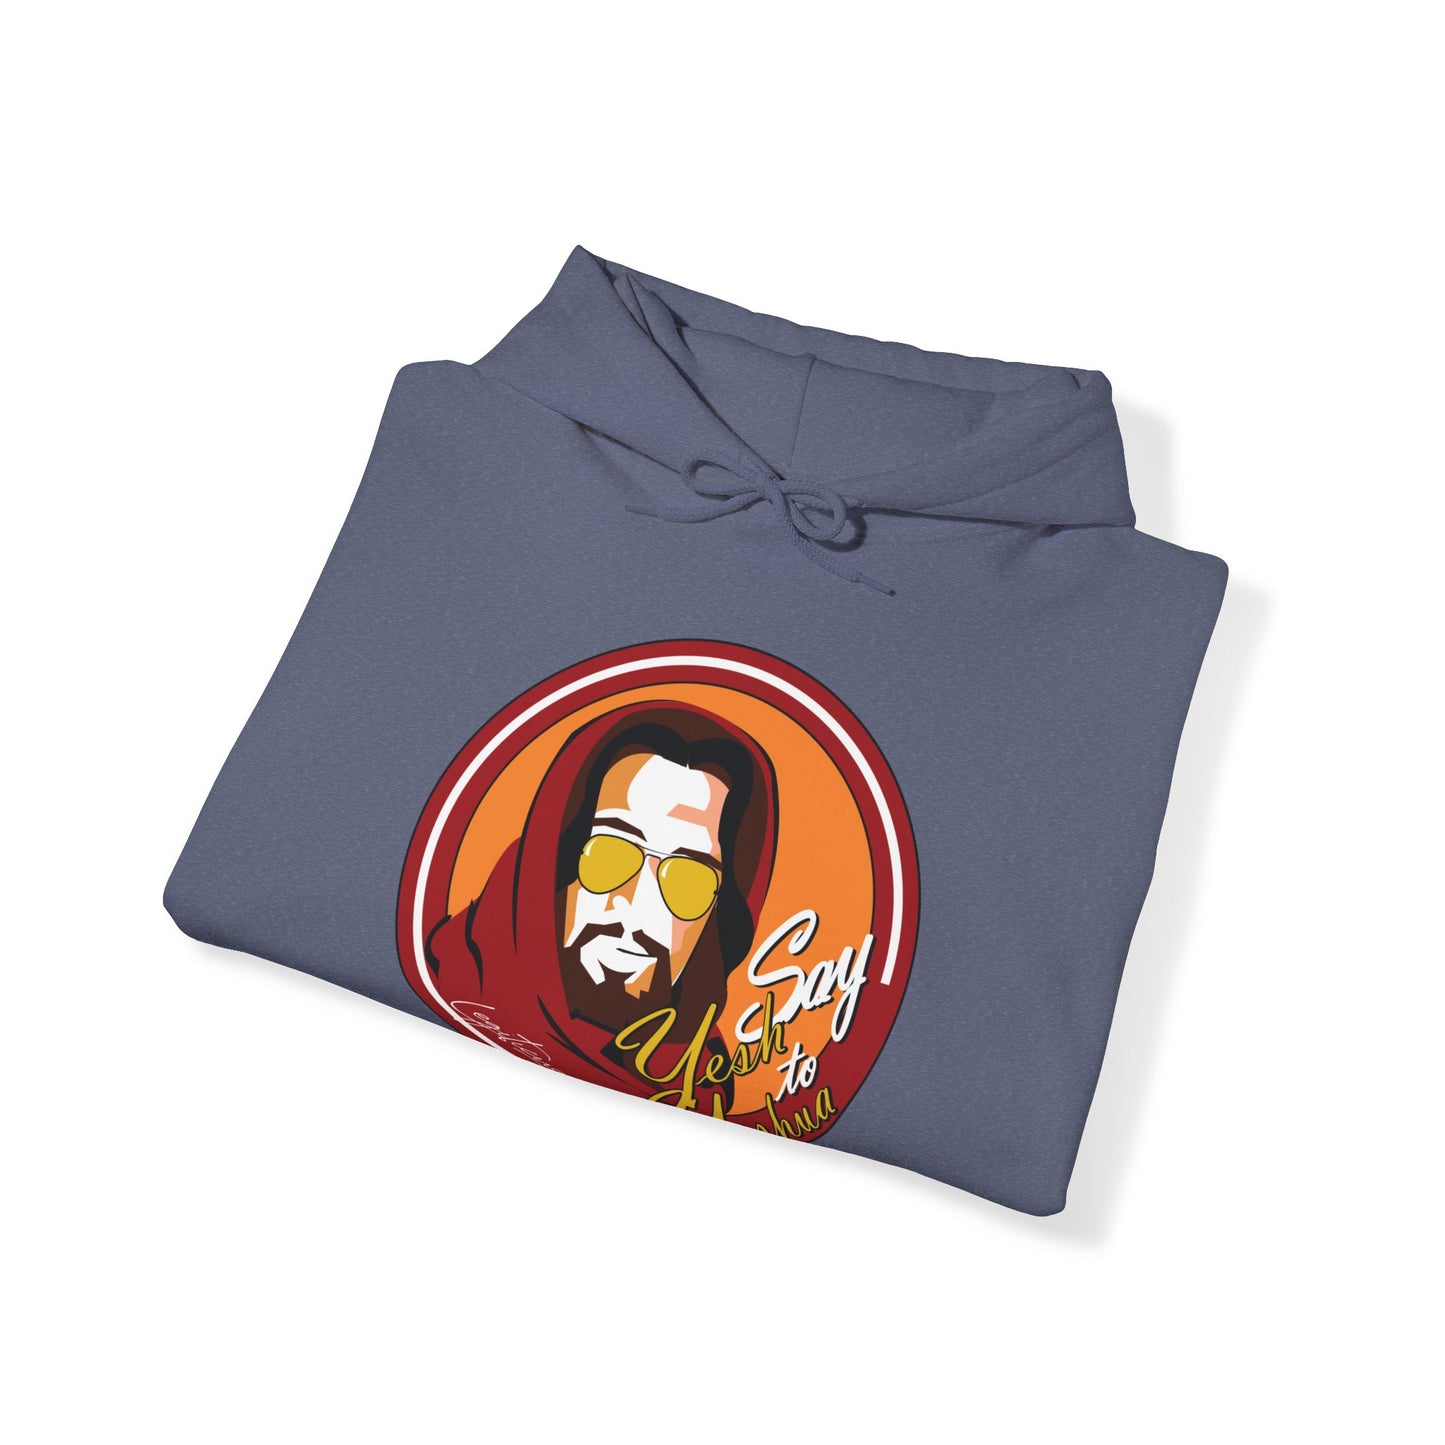 Say Yesh to Yeshua red and gold Hooded Sweatshirt